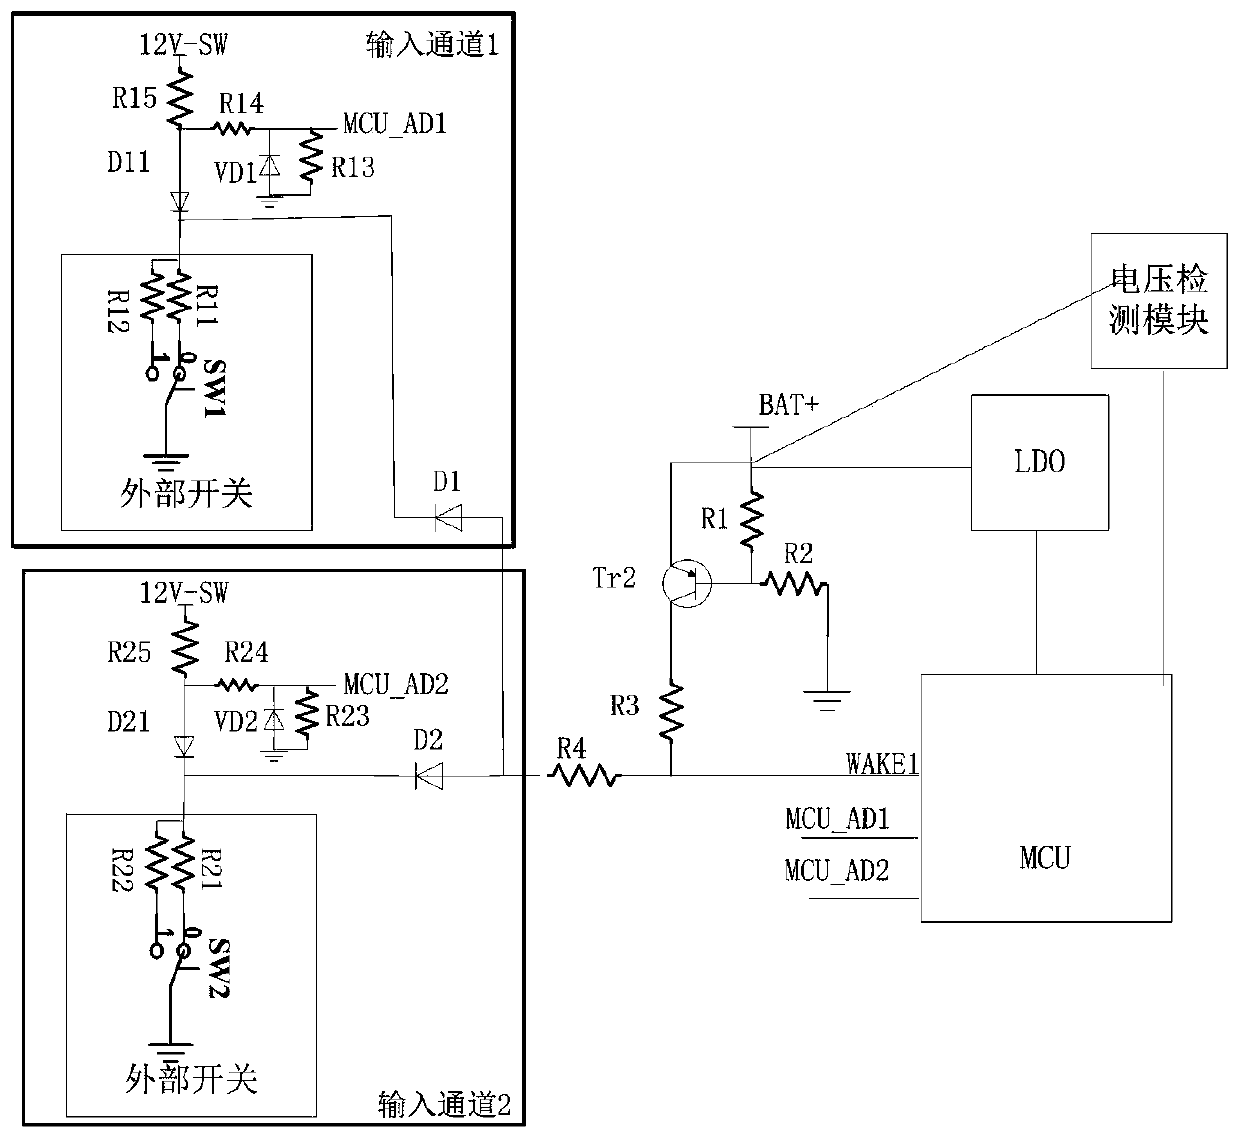 Multichannel analog input detection circuit with trigger wake-up function